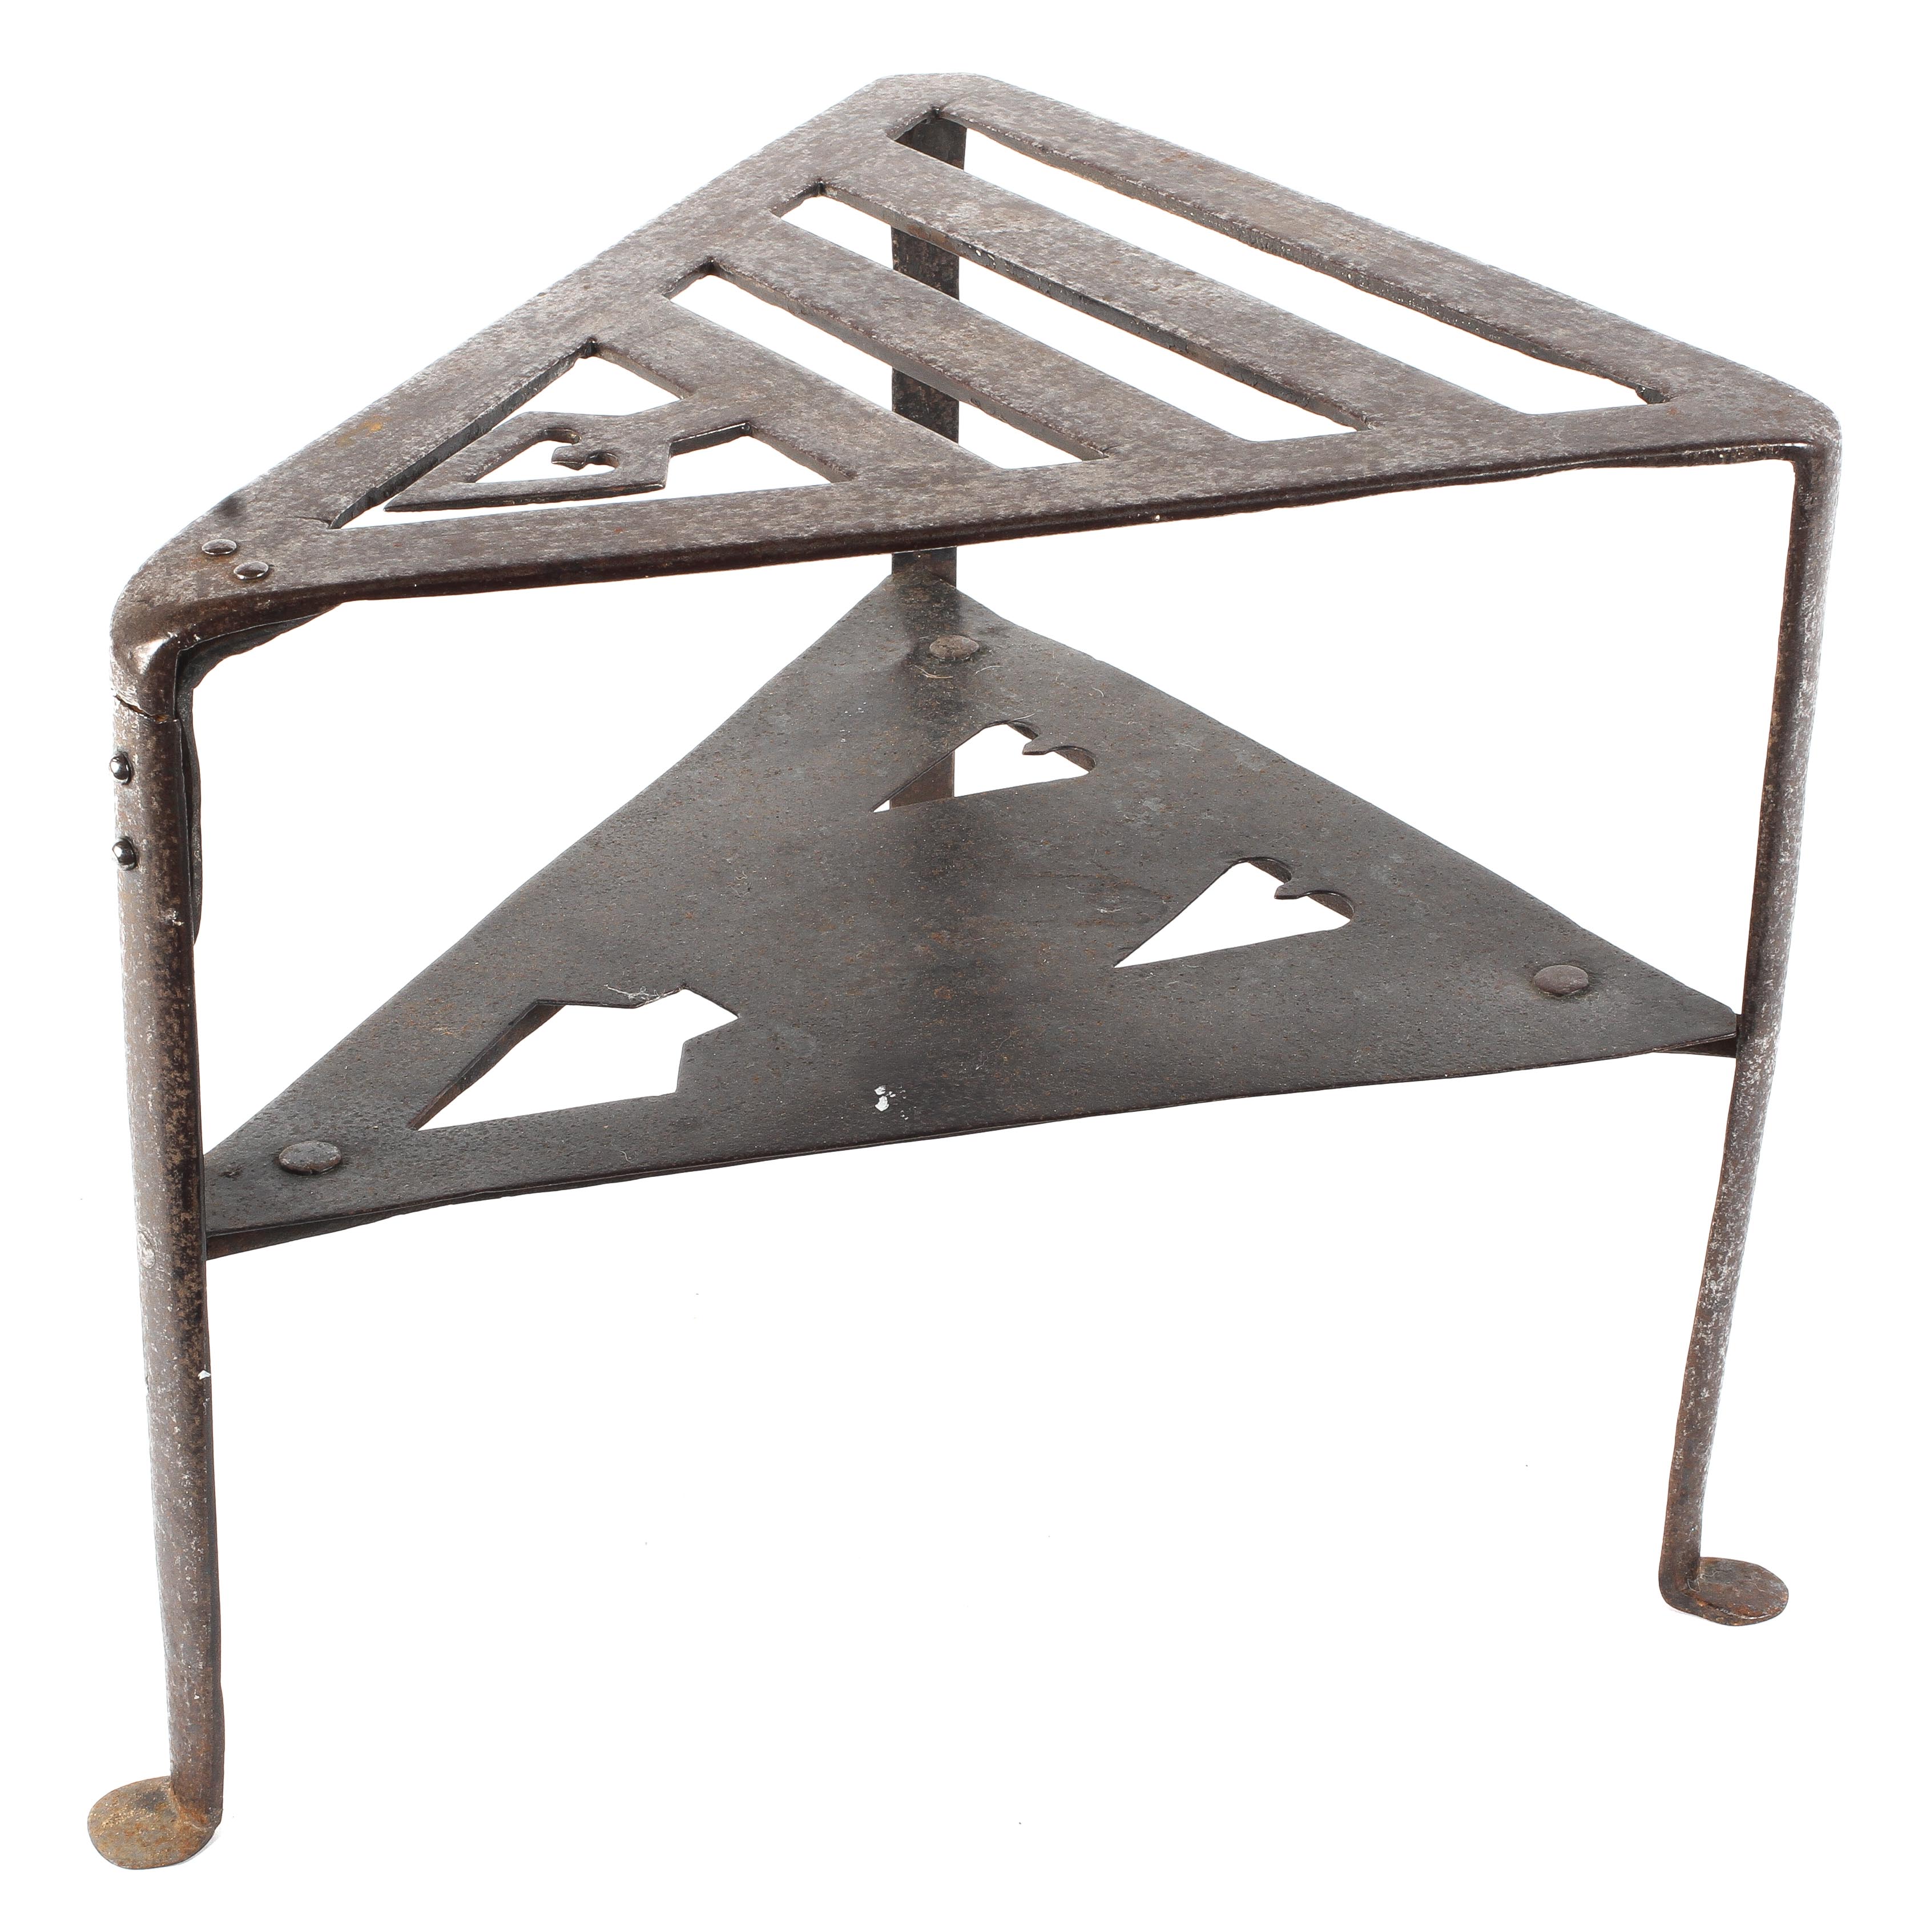 An Arts and Craft style early 20th century cast metal stand, of triangular form with two tiers, - Image 2 of 3